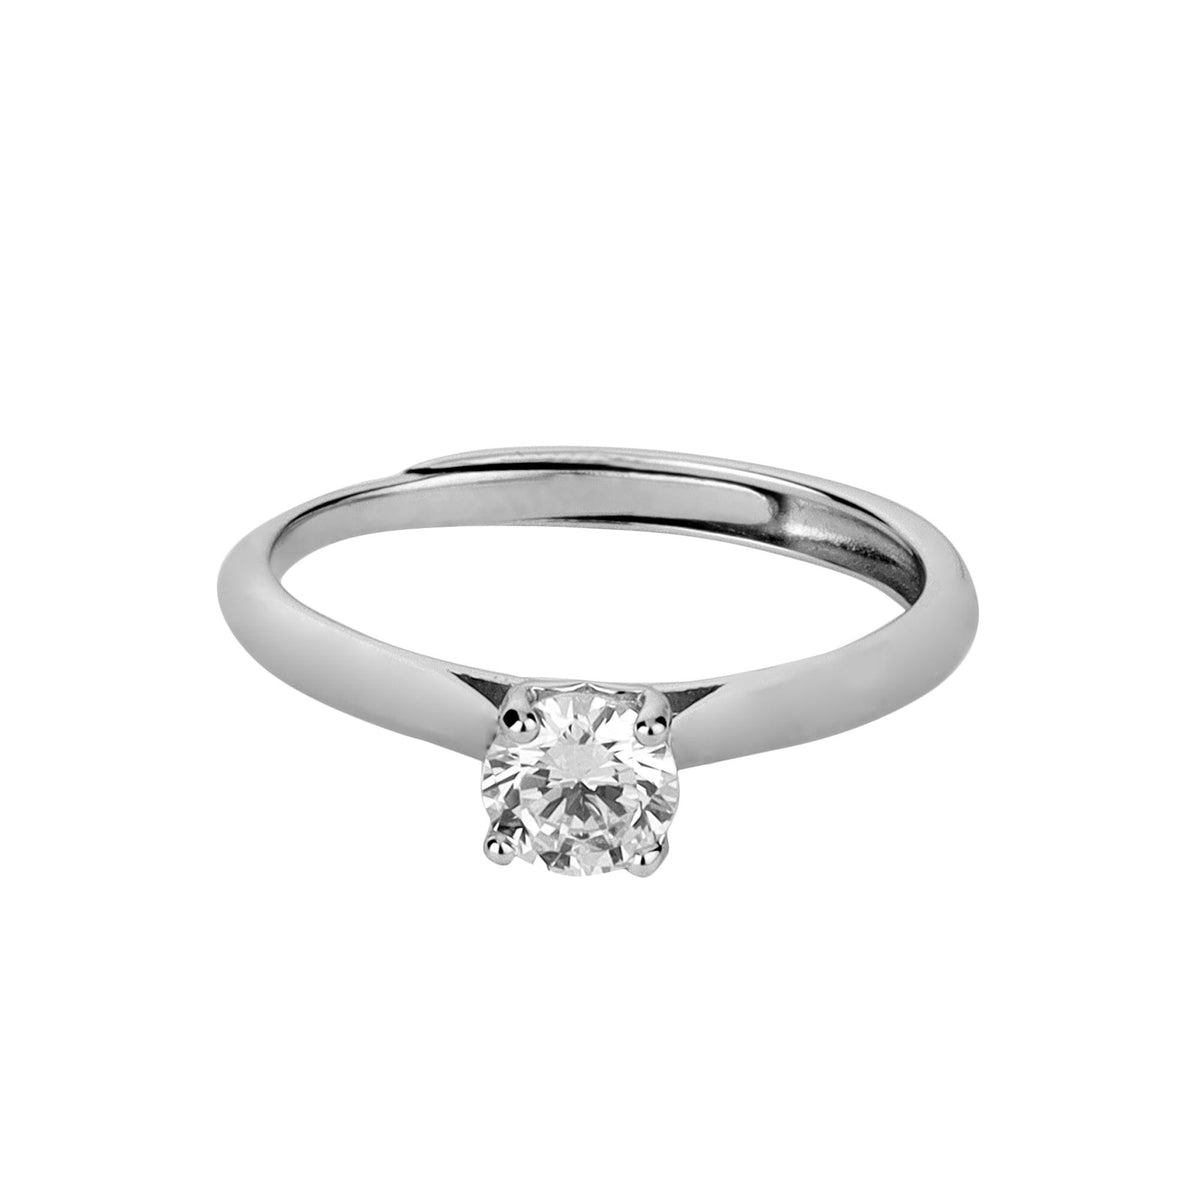 The Classy Single Stoned Adjustable Ring - silvermark